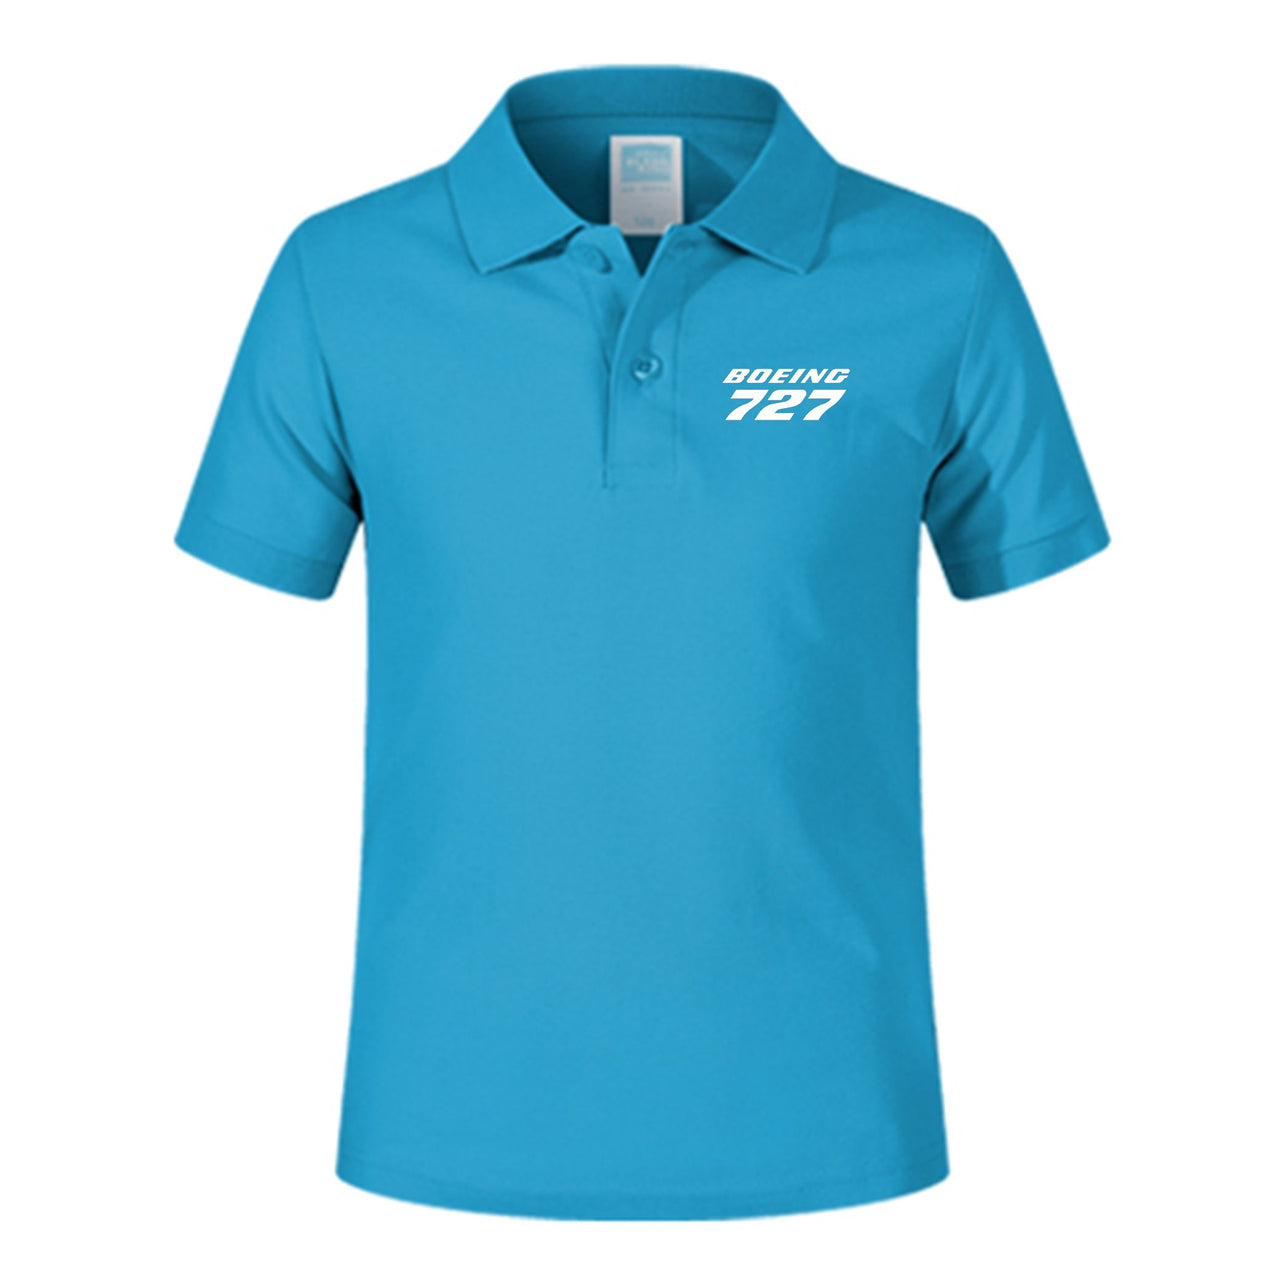 Boeing 727 & Text Designed Children Polo T-Shirts